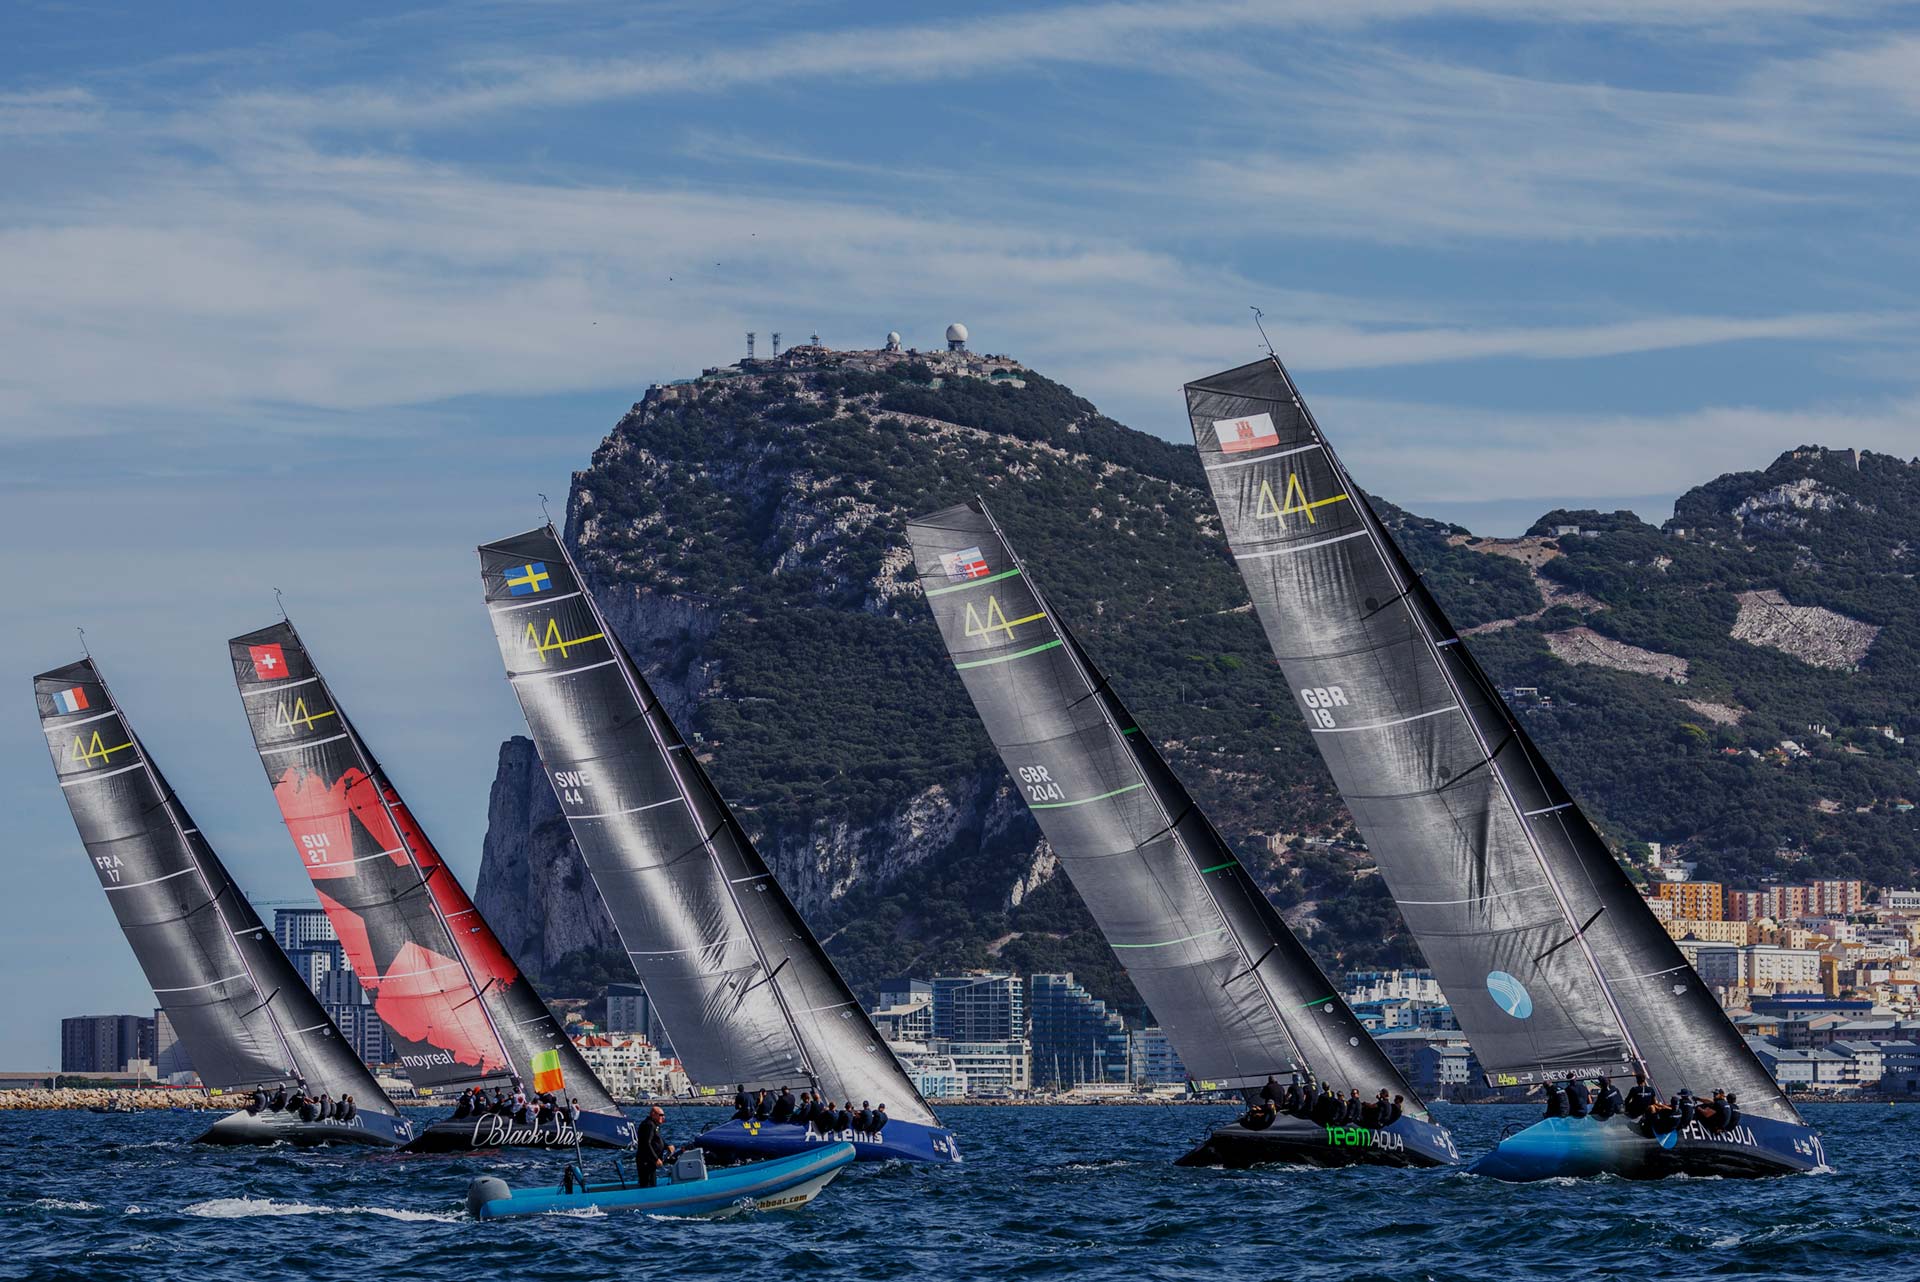 The 44Cup Alcaidesa Marina under the symbolic Rock of Gibraltar once again had it all. The conditions were sometimes sunny and pleasant, ...